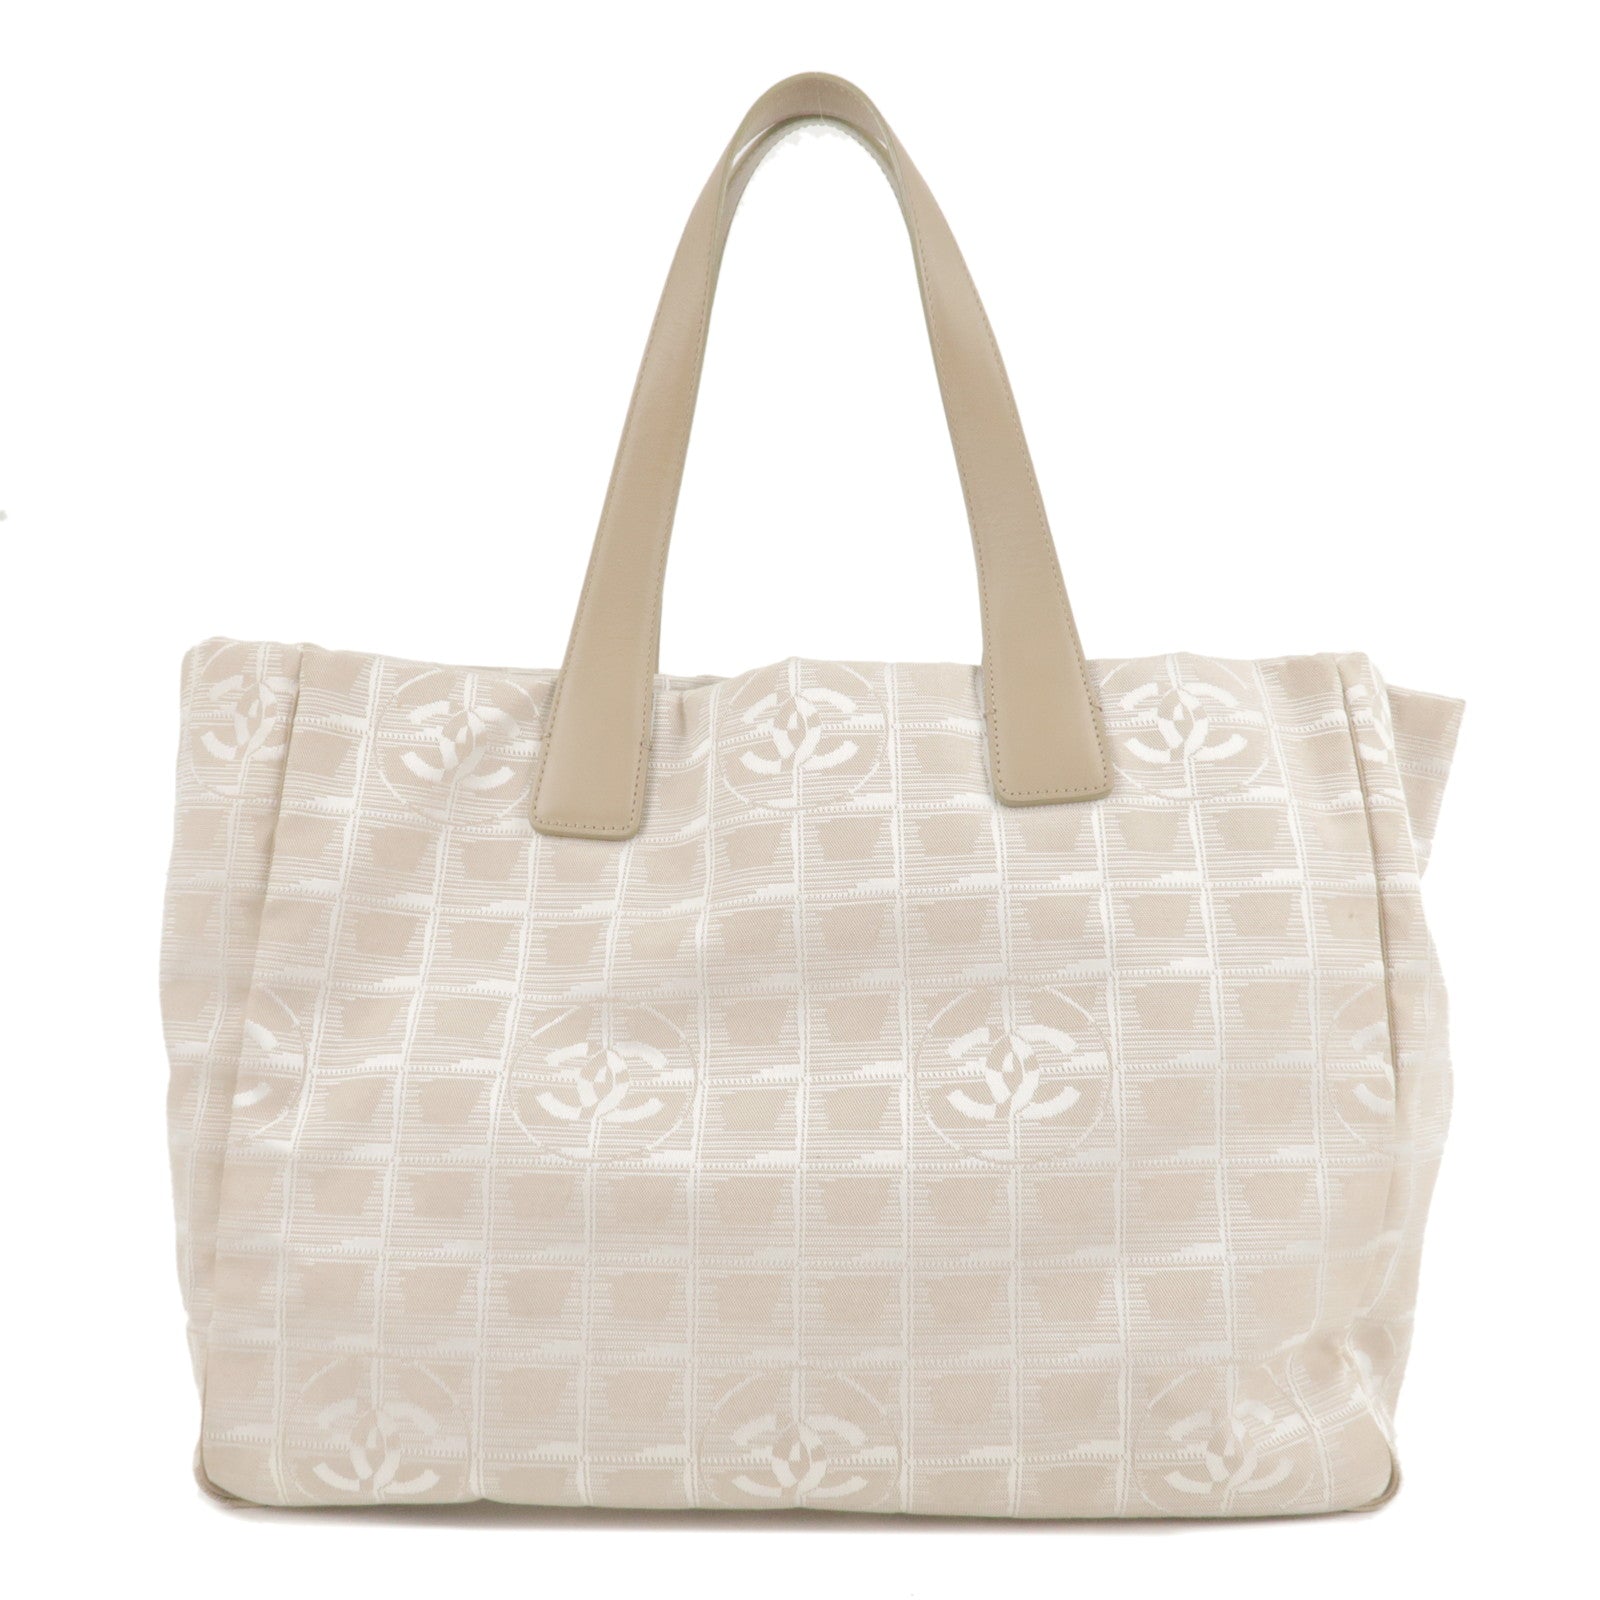 CHANEL-New-Travel-Line-Nylon-Jacquard-Leather-Tote-Bag-MM-A15991